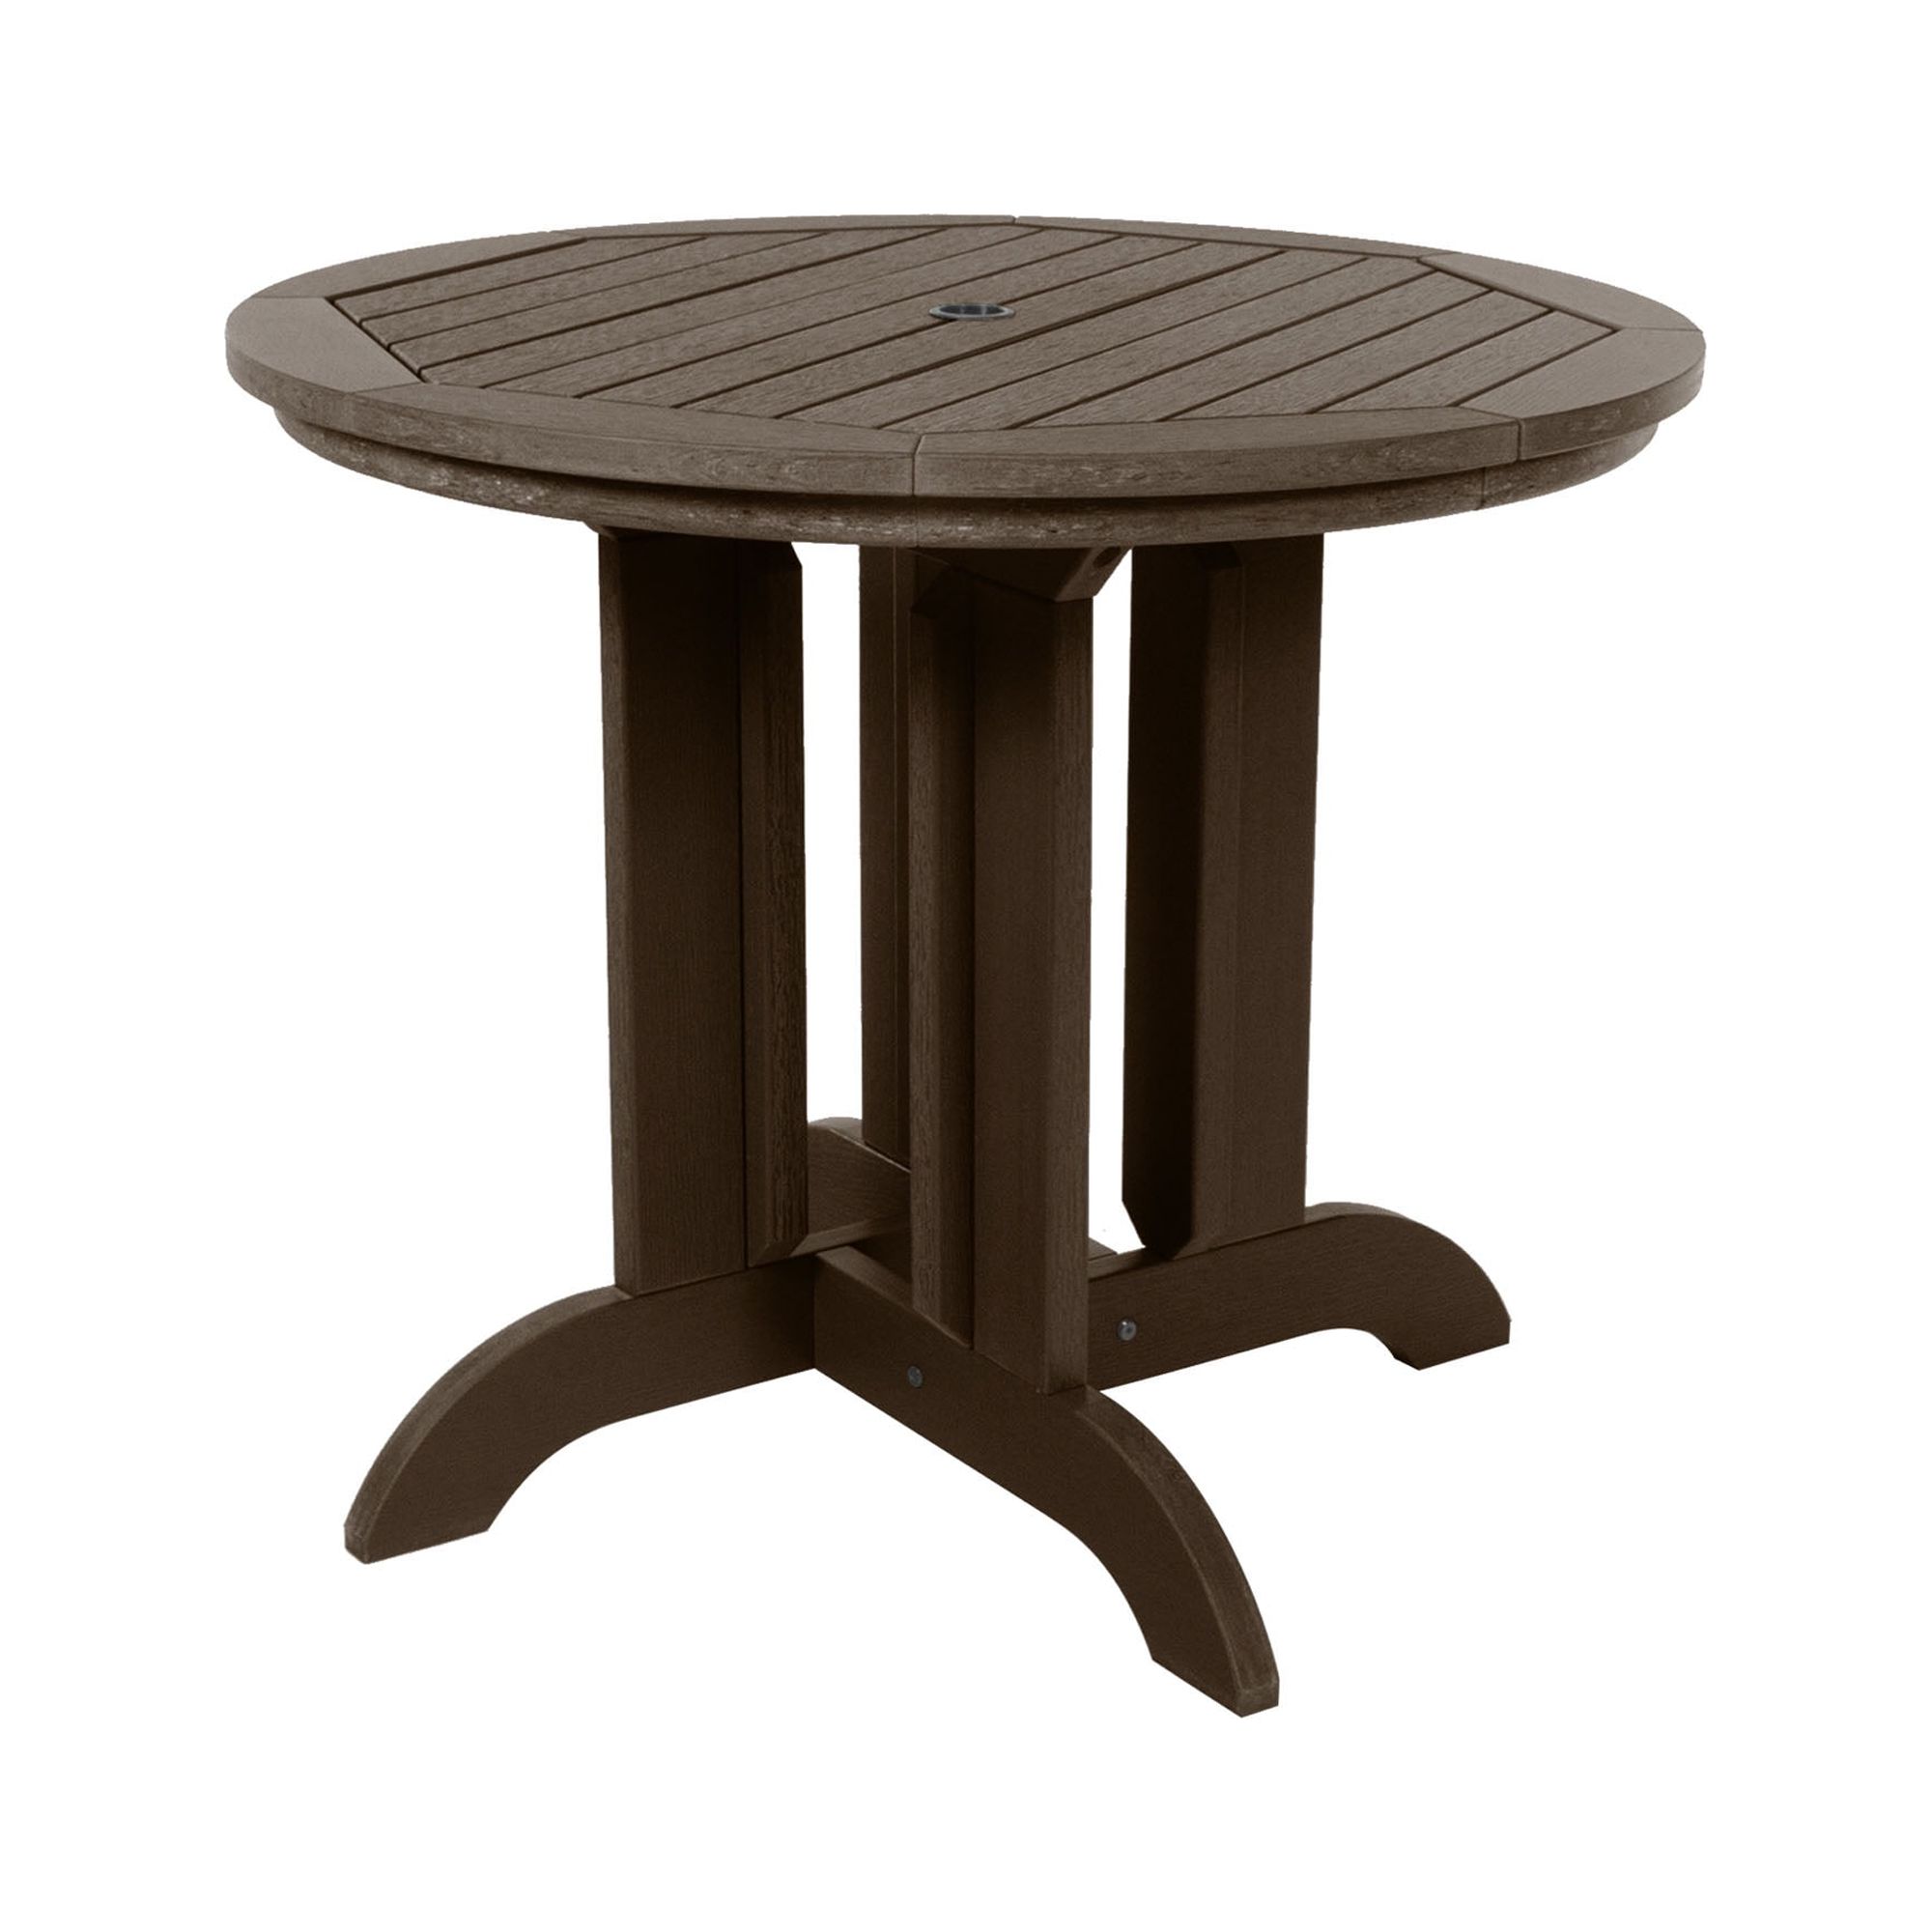 The Sequoia Professional Commercial Grade 36 inch Round Bistro Dining Height table - image 1 of 2